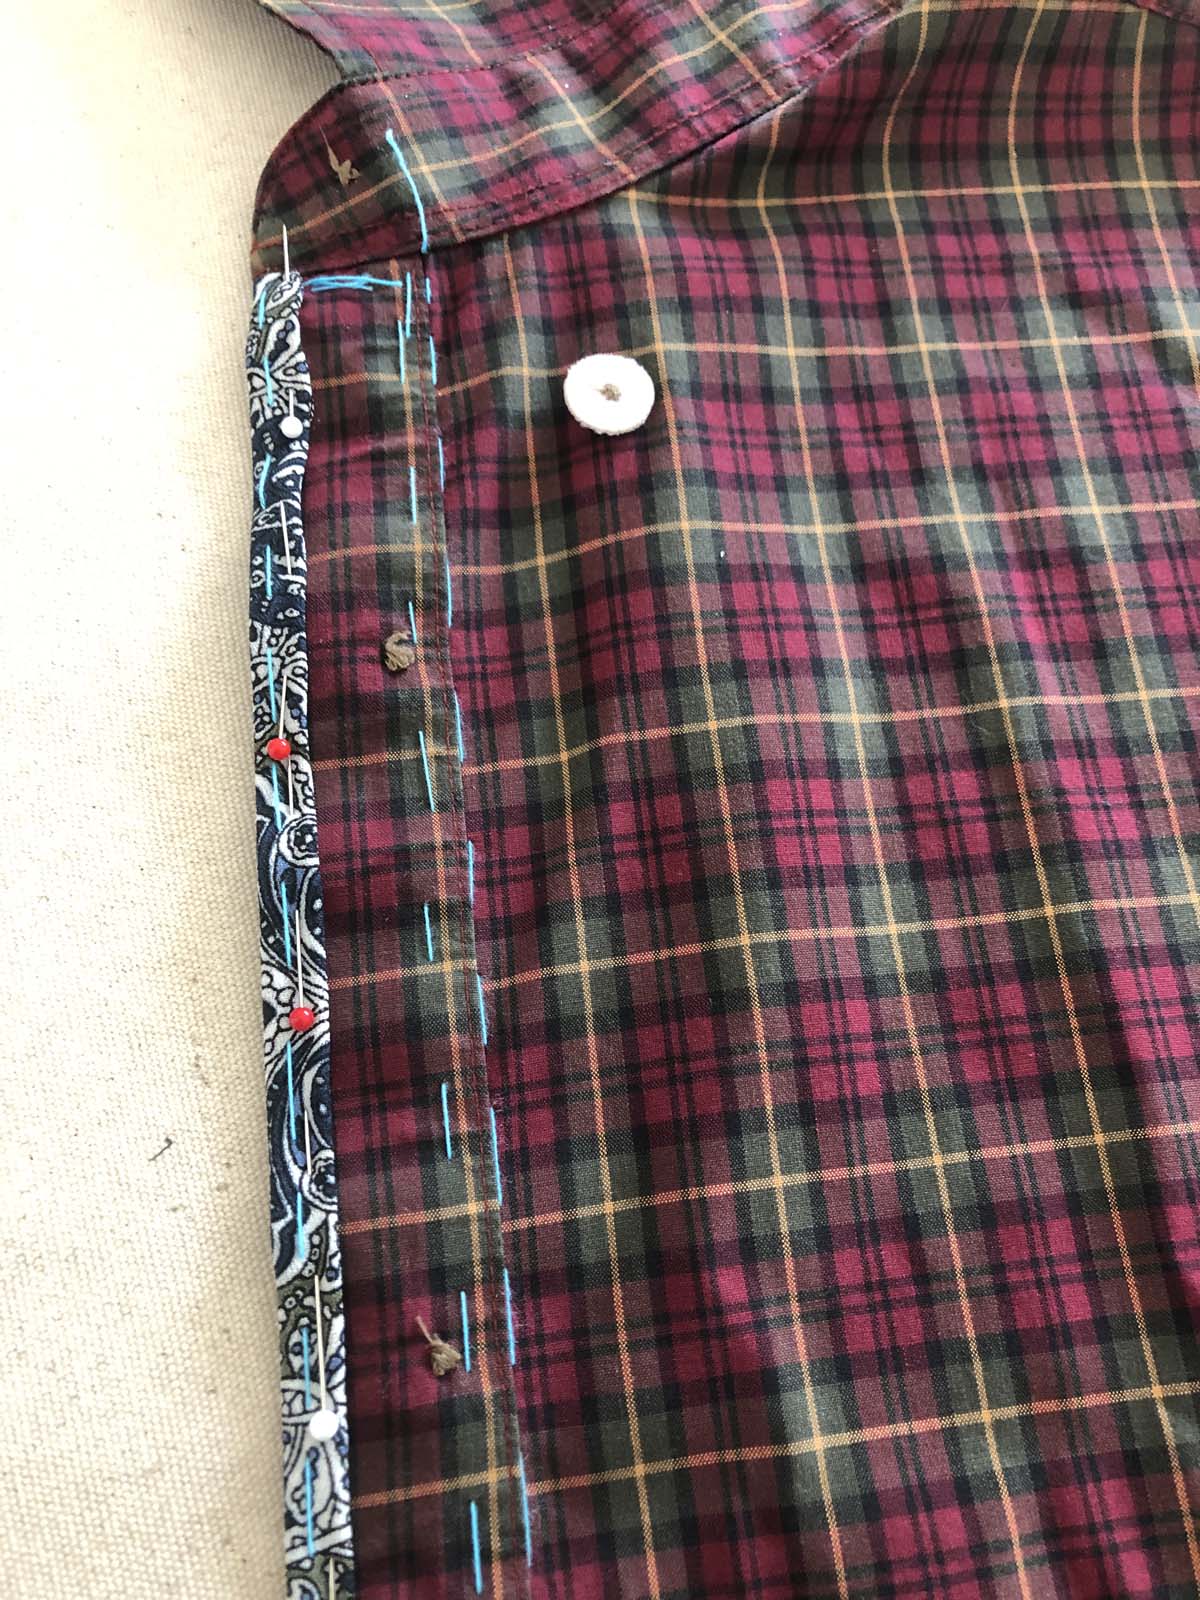 Wrap the fabric and pin to bind the edge by hand